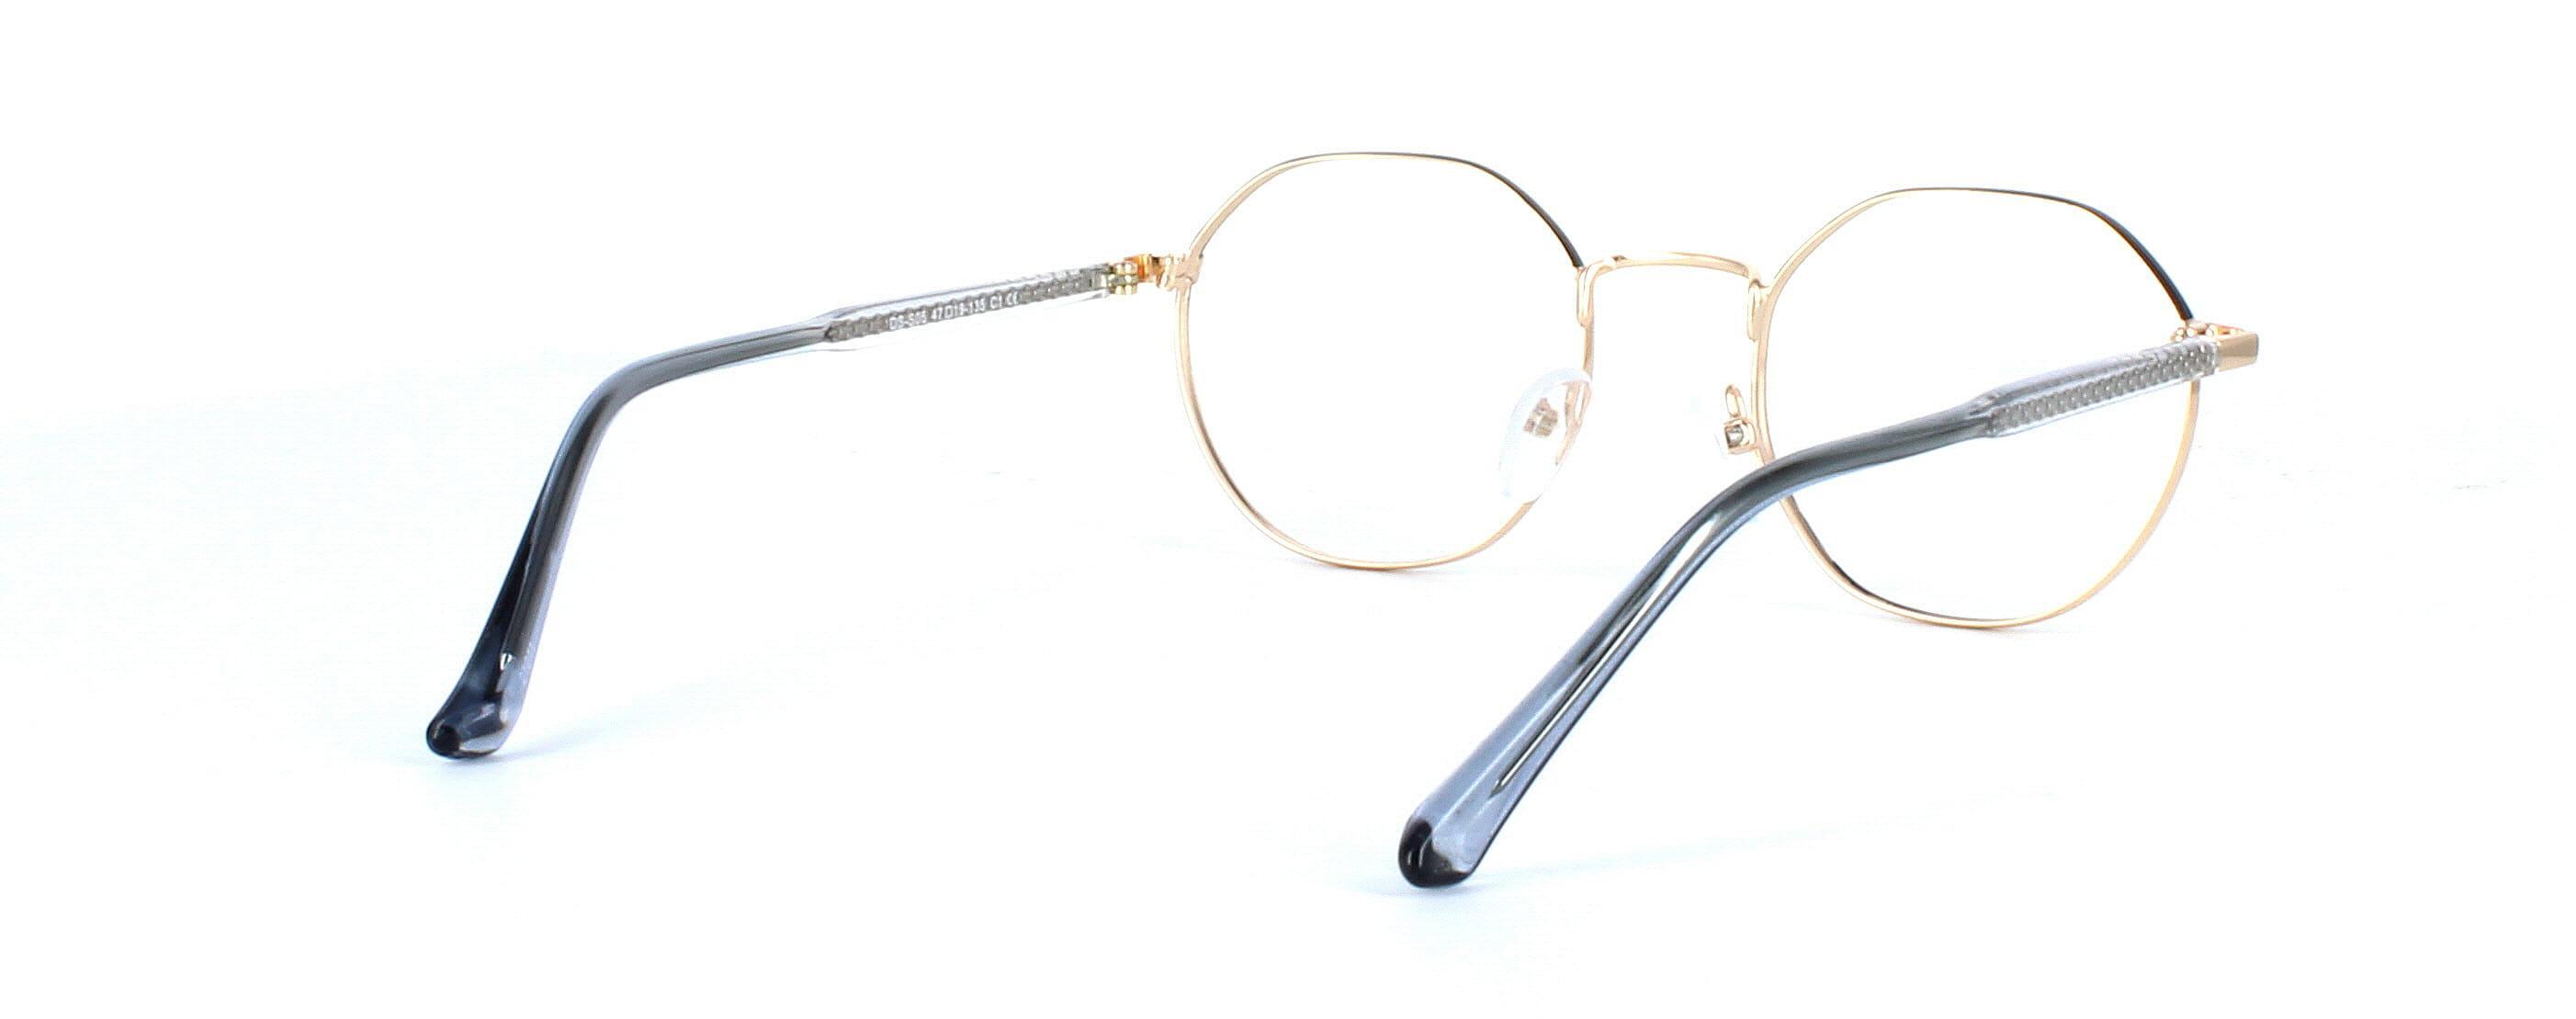 Cassiopeia - ladies hexagonal 2-tone metal glasses frame here in black & gold - image view 4